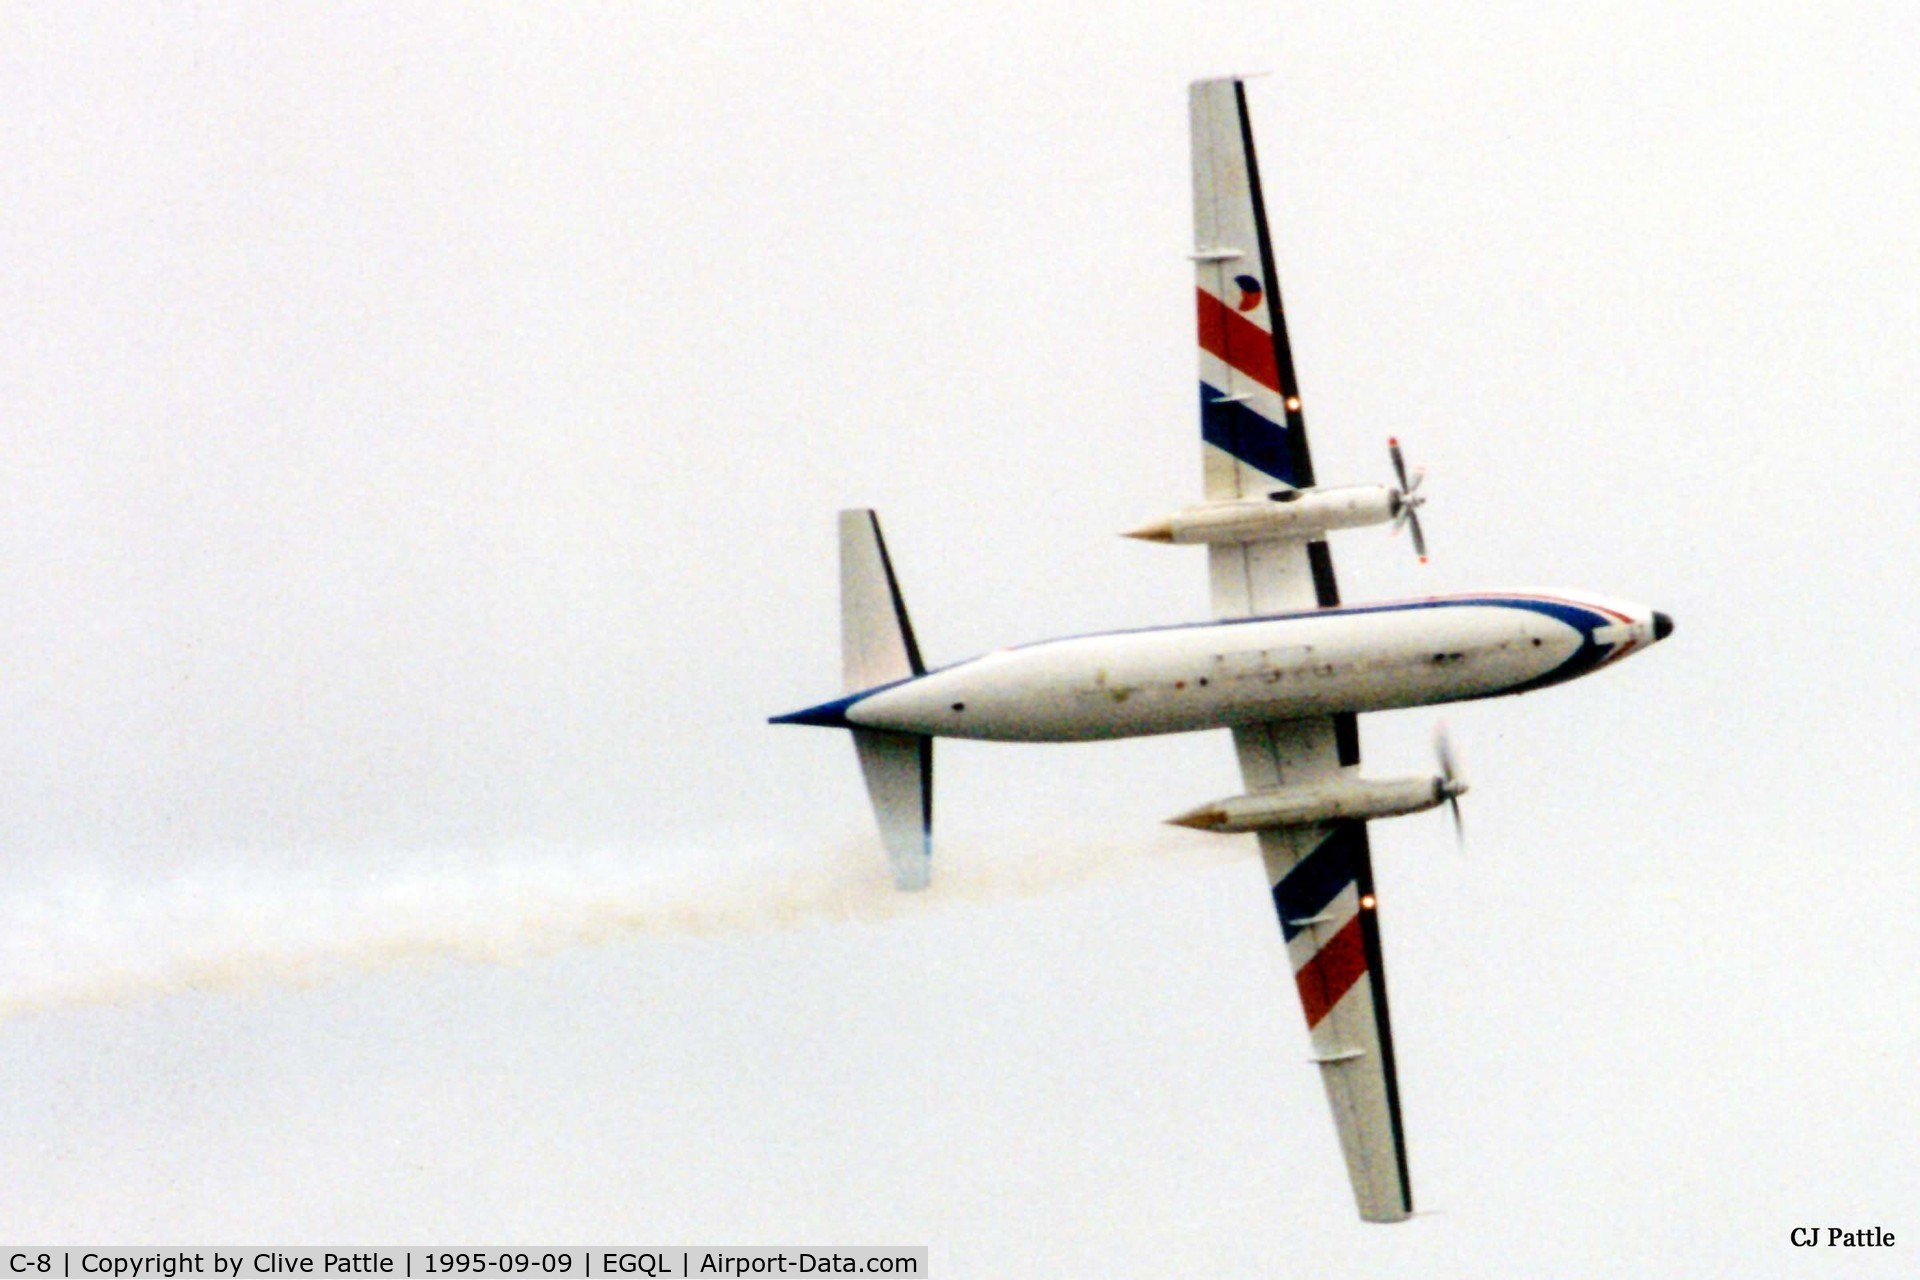 C-8, 1960 Fokker F-27-300M Troopship C/N 10158, Scanned from print (apols for reduced quality). C-8 of 334 Sqn RNeth AF seen displaying at the RAF Leuchars Airshow, September 1995.